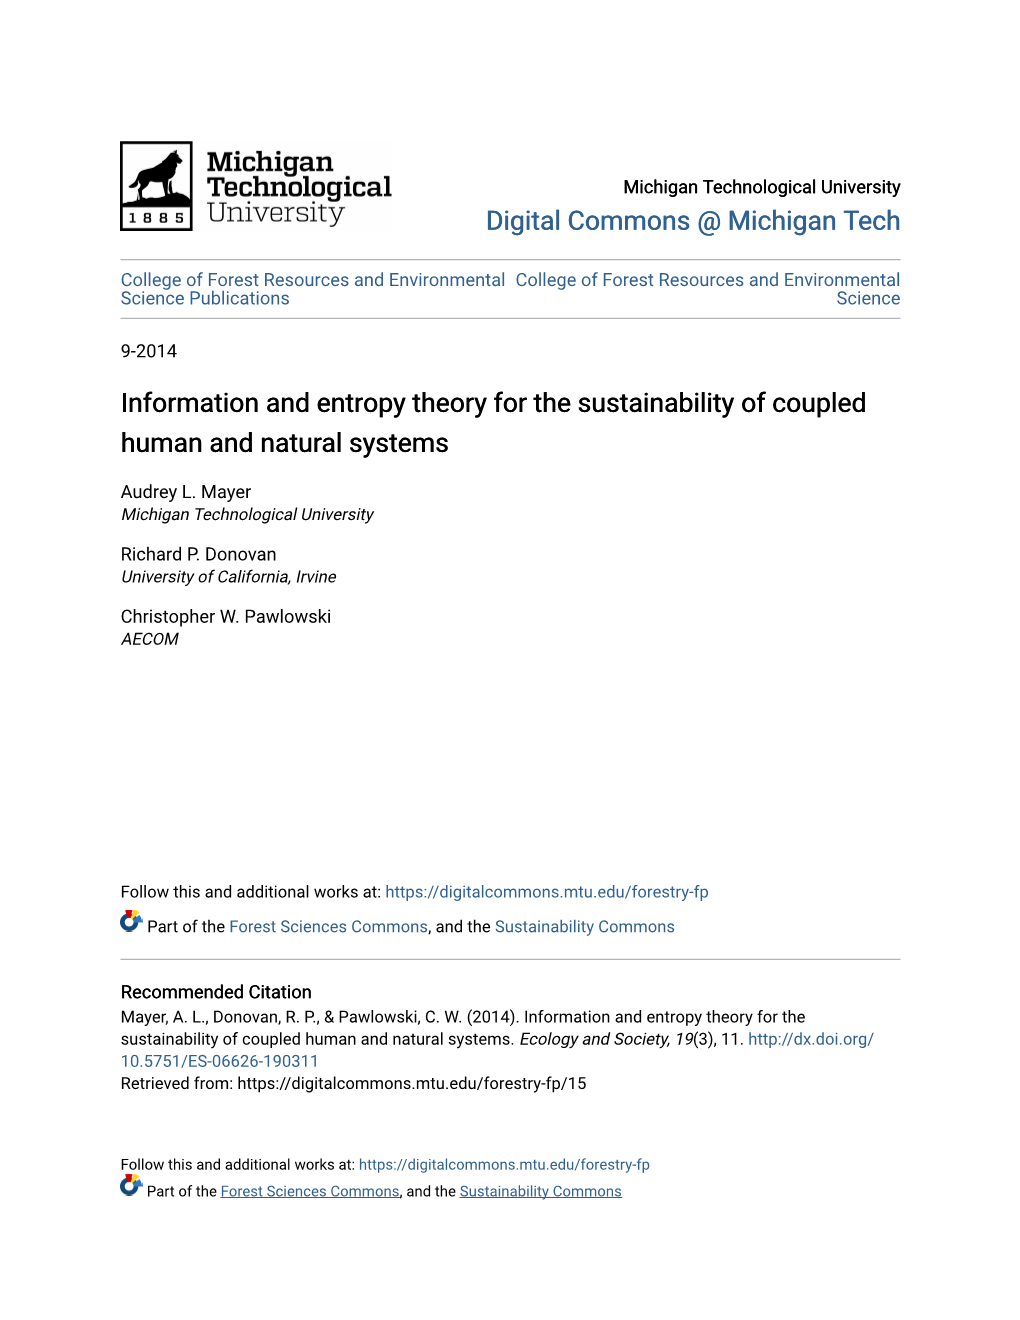 Information and Entropy Theory for the Sustainability of Coupled Human and Natural Systems